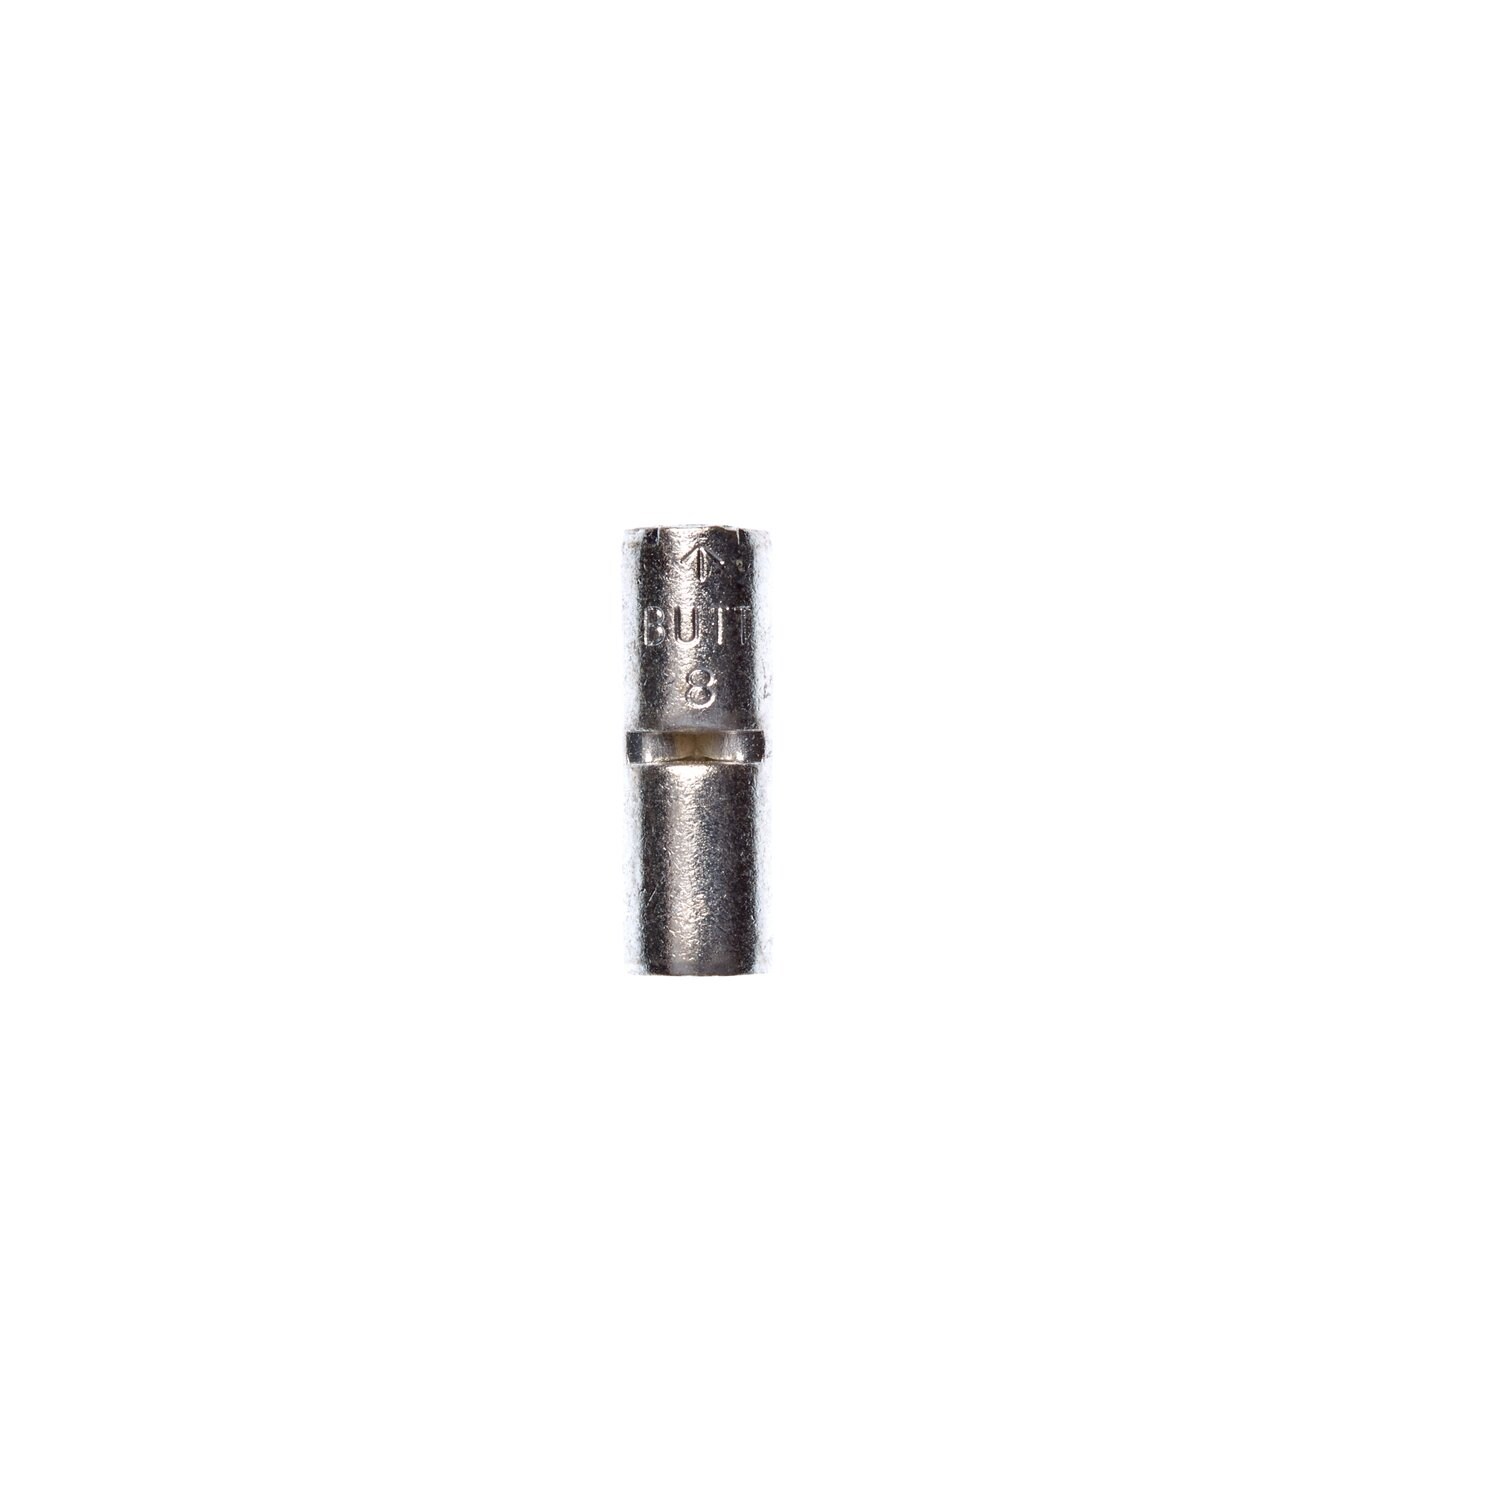 7100164152 - 3M Scotchlok Butt Connector, Non-Insulated Brazed Seam M8BCK, 8 AWG,
built-in wire stop for correct positioning, 200/Case